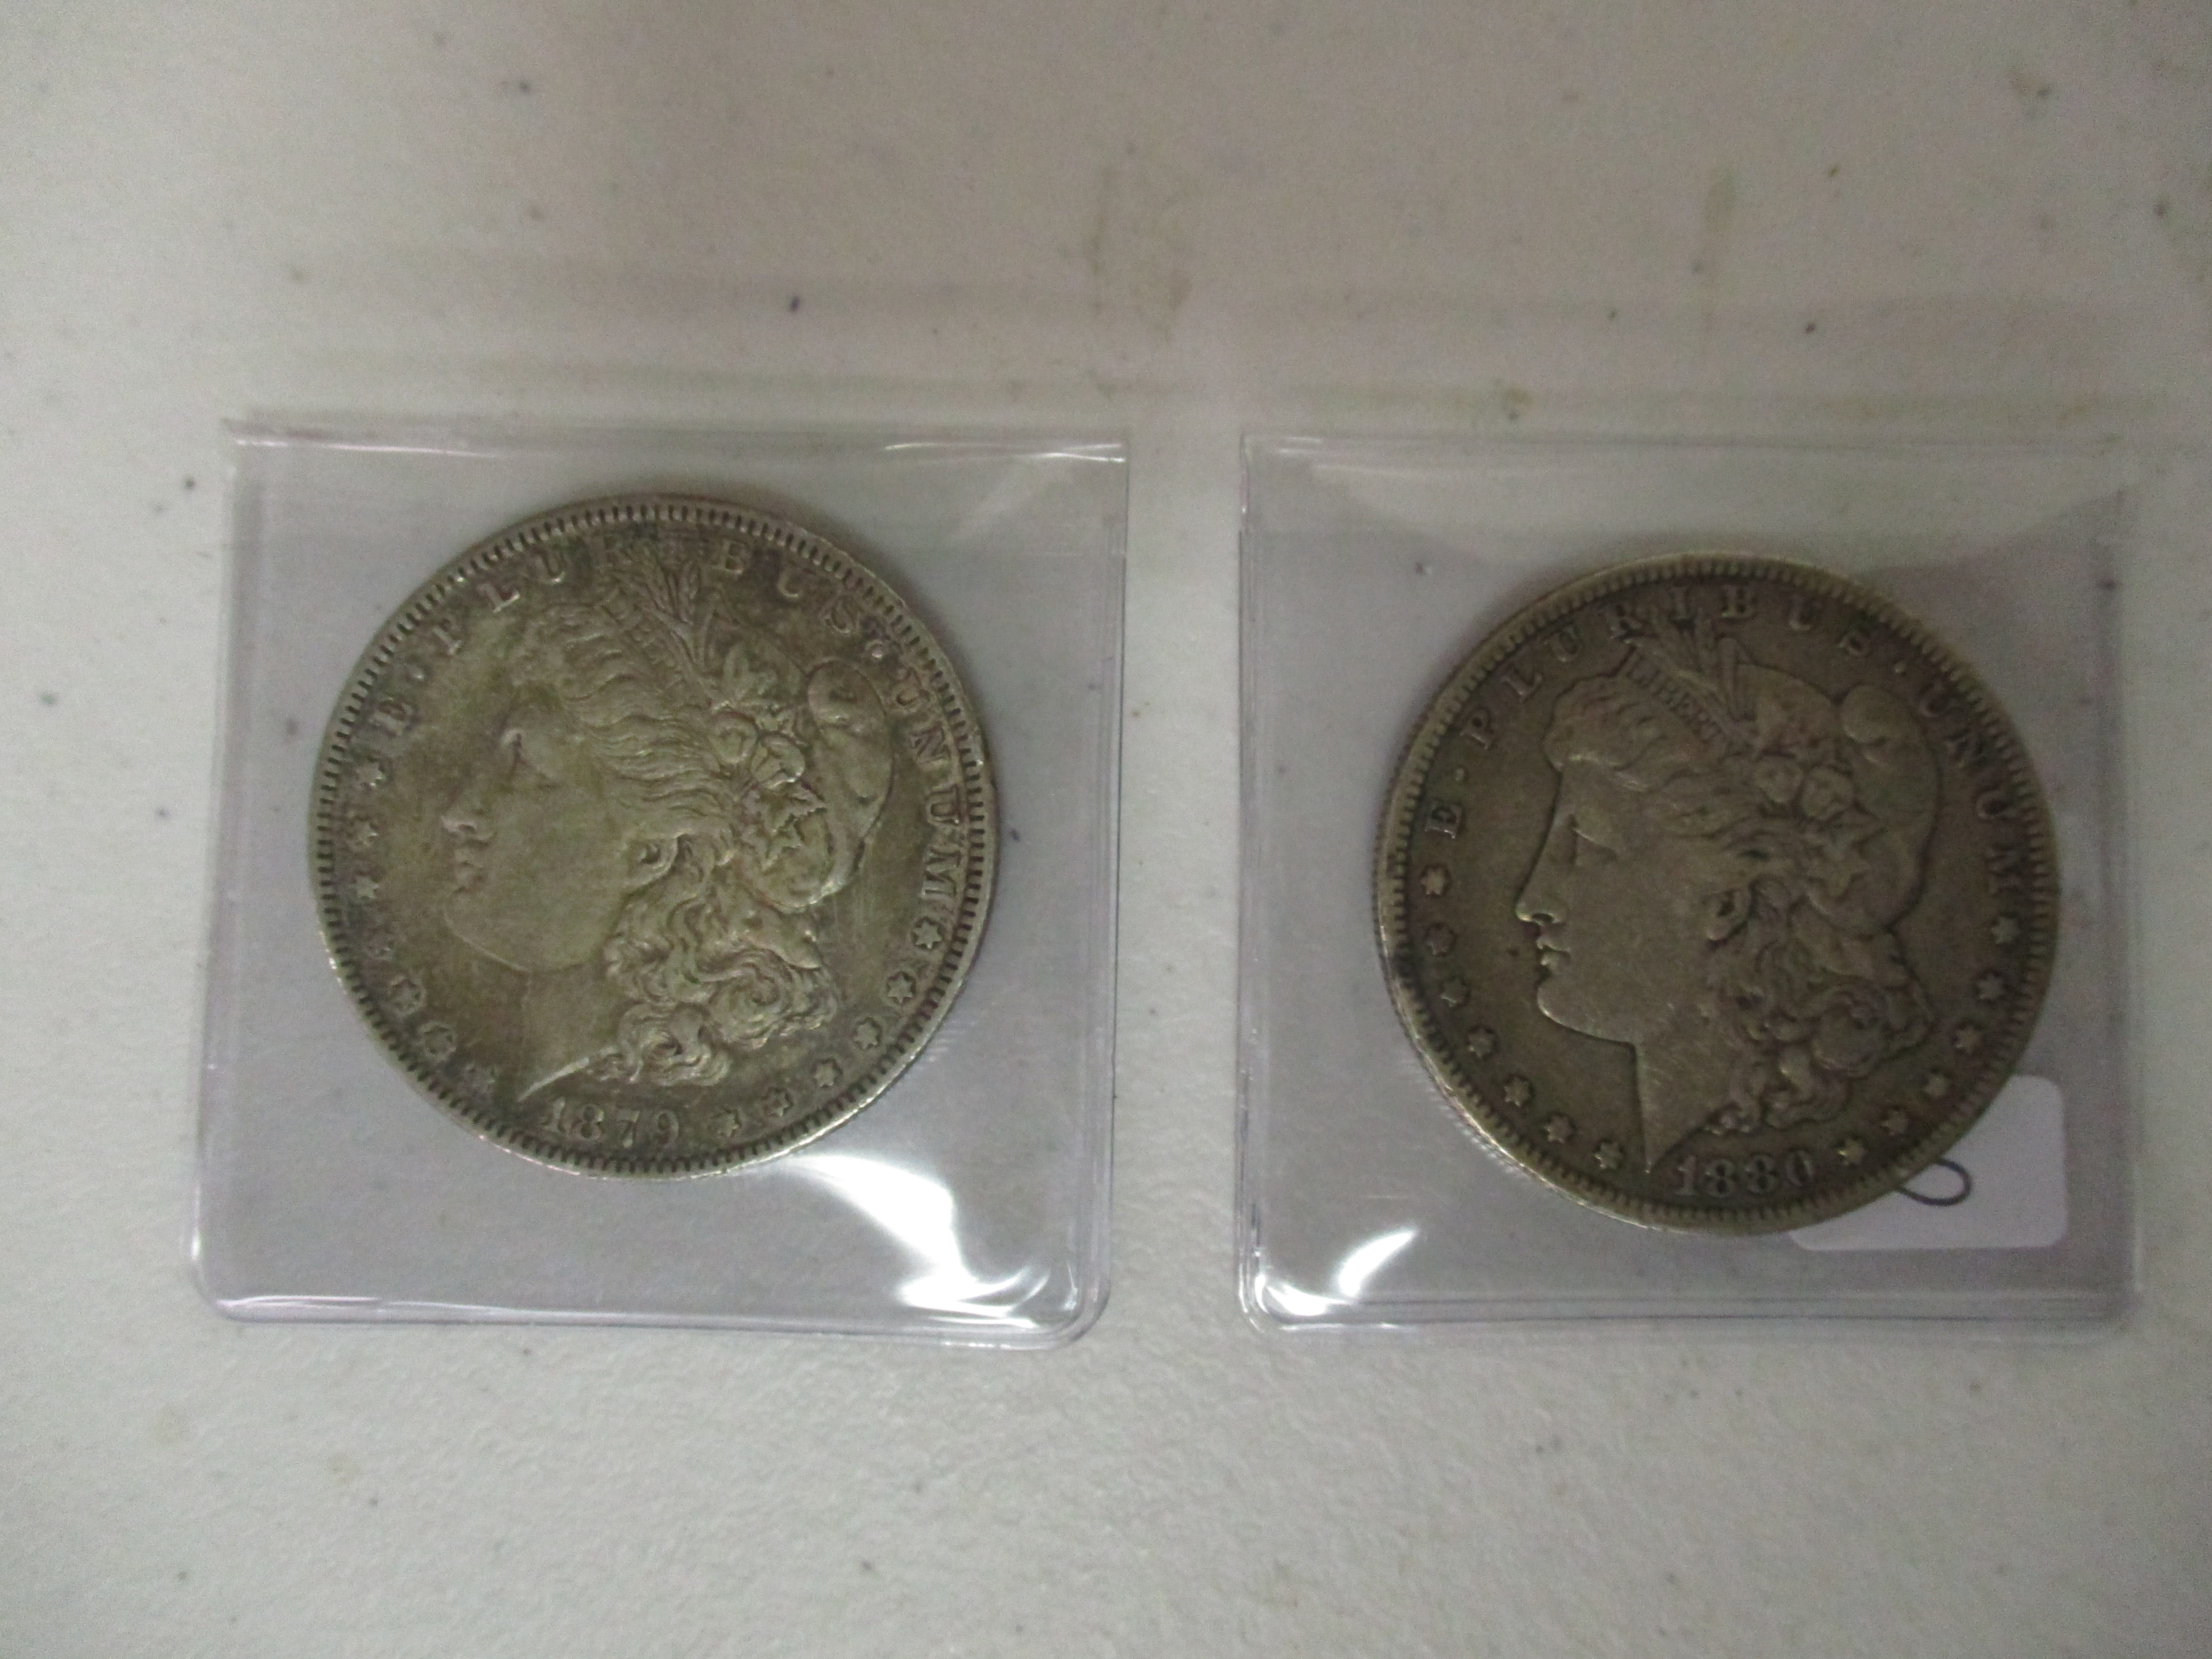 Lot 28: 1879 And 1880S Morgans (by The Piece, Take 2)